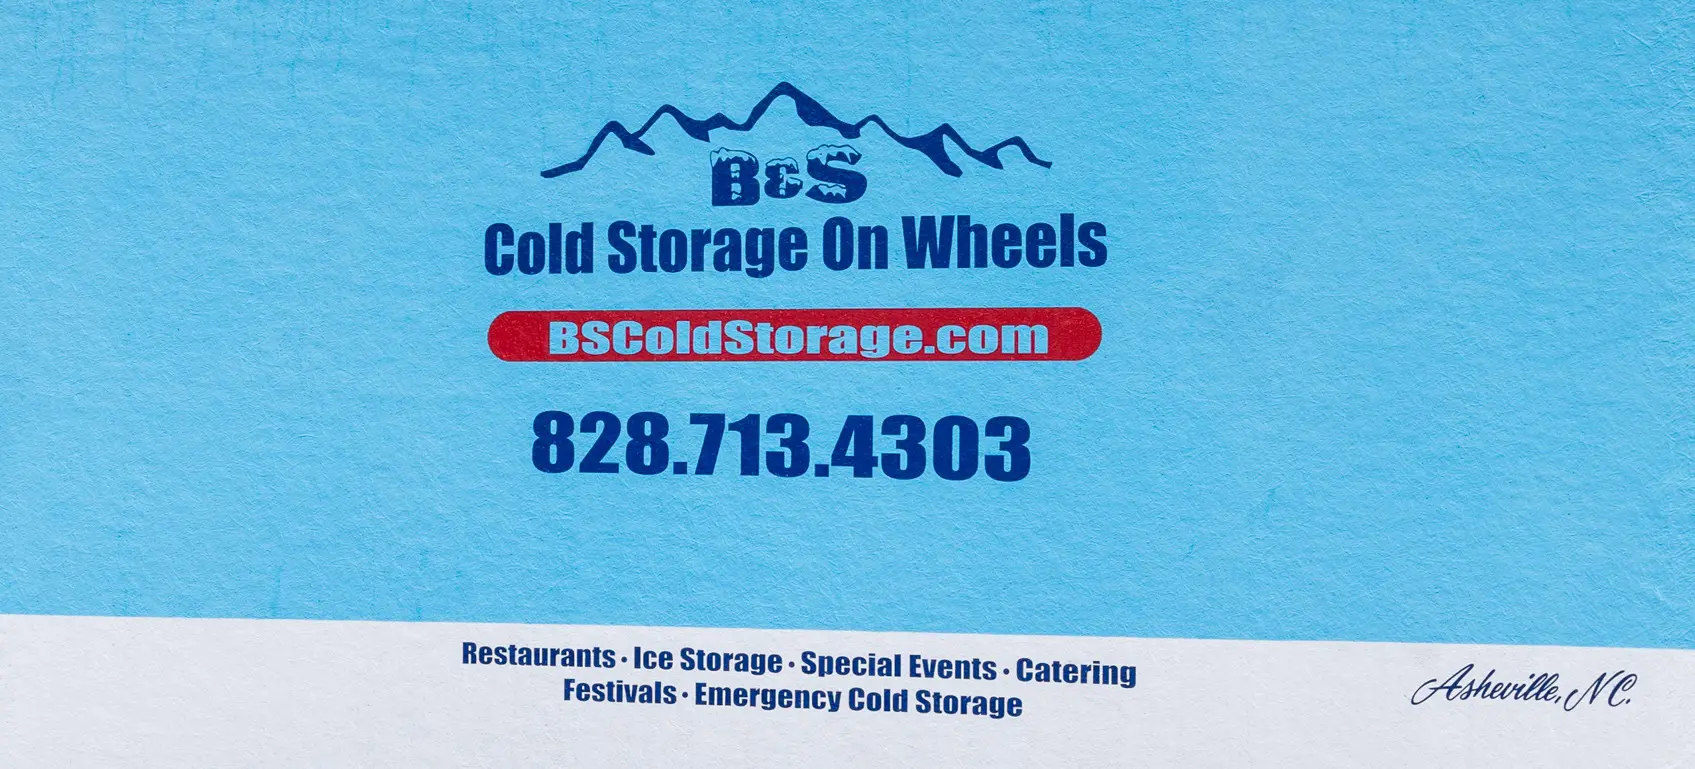 Cover_B&S MOBILE COLD STORAGE (22 of 44)(1)